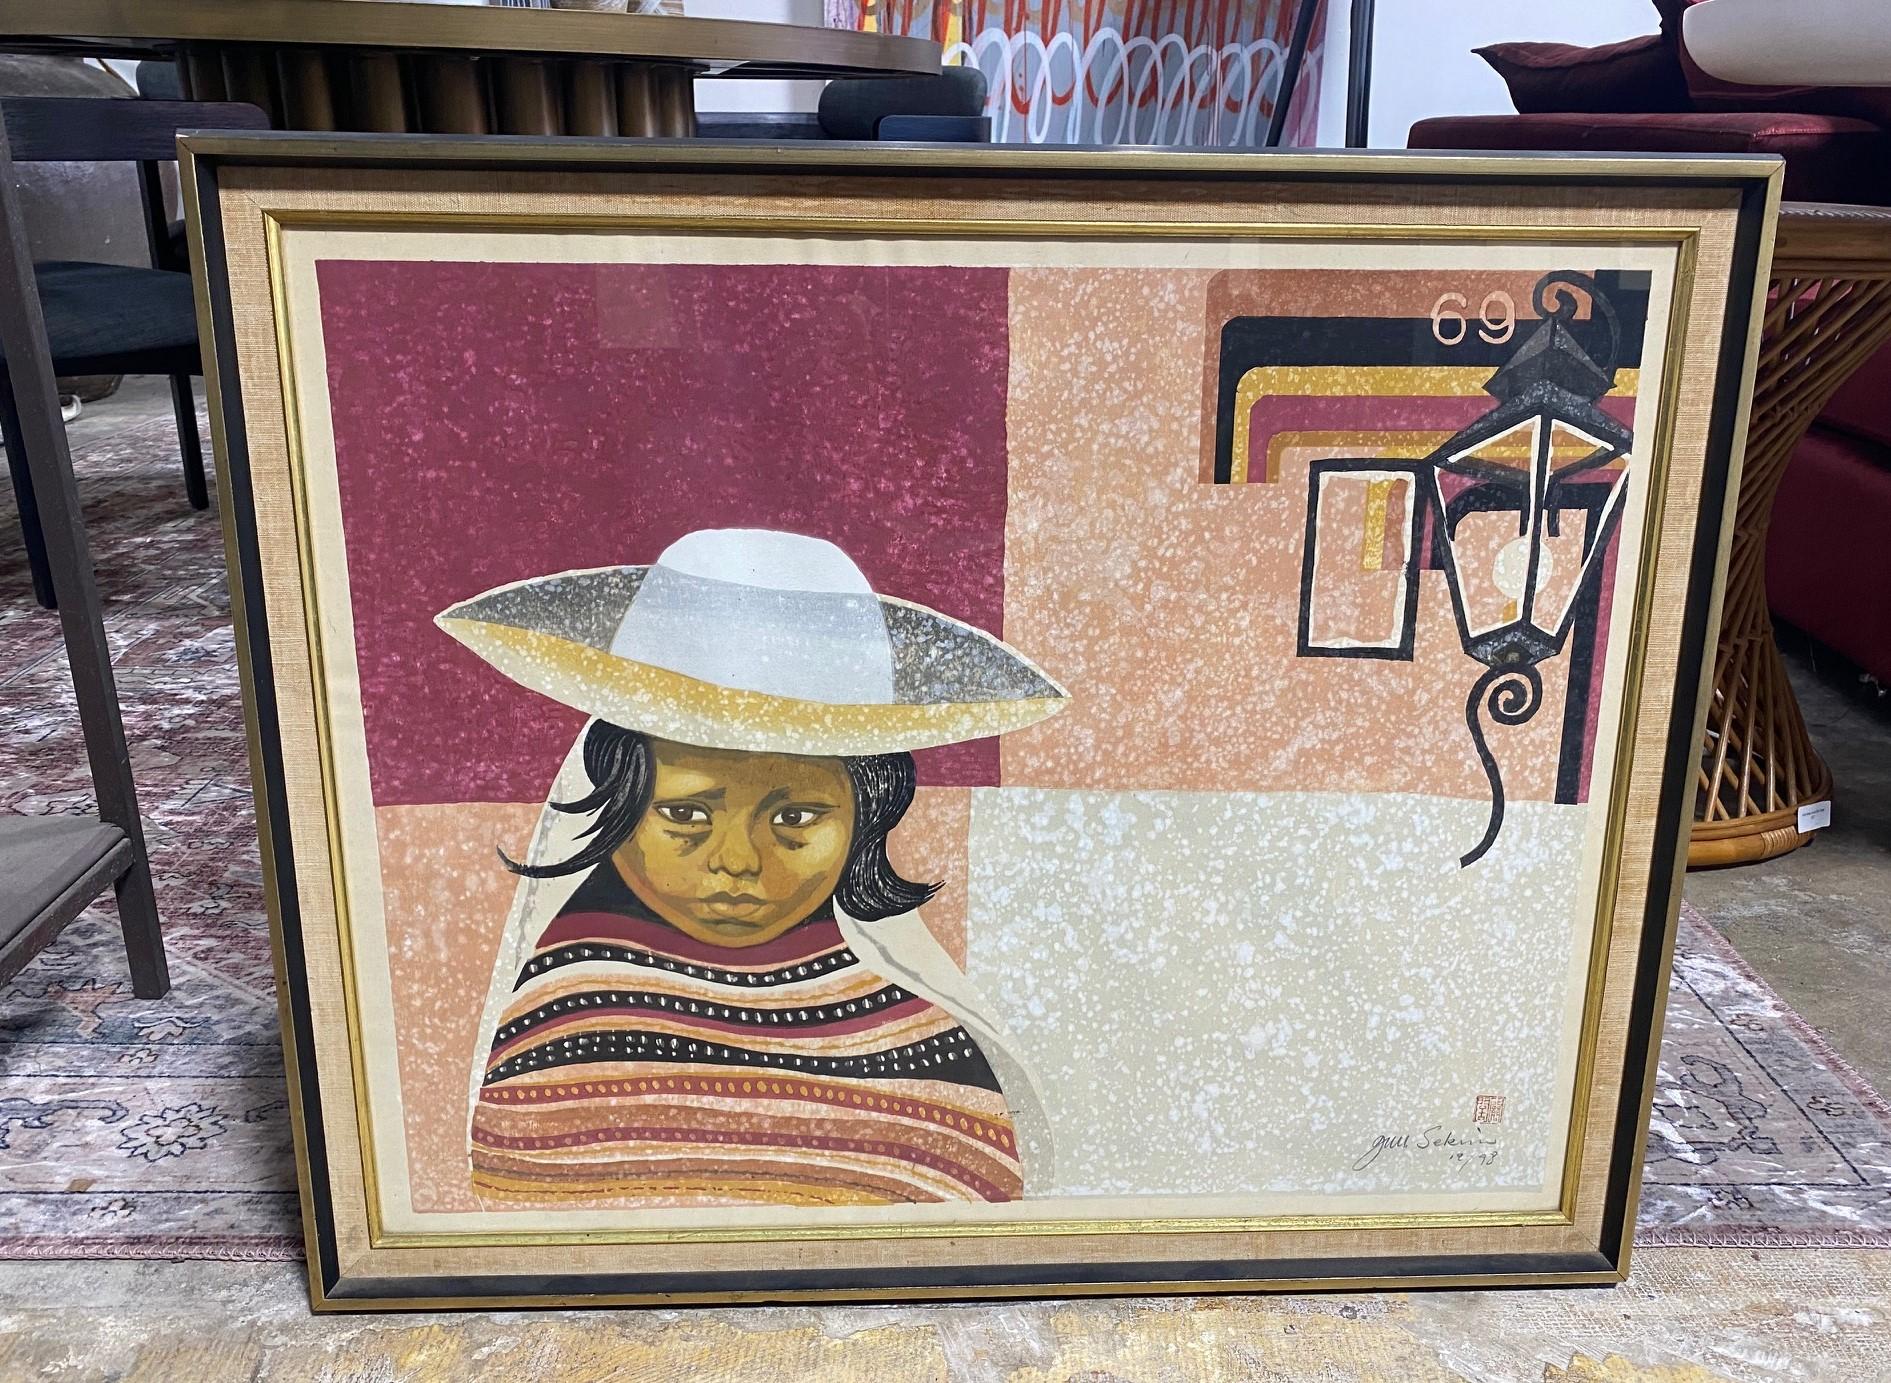 A truly wonderful and extremely rare limited edition woodblock print by famed Japanese artist Junichiro Sekino
This print of a pensive young girl dressed in a poncho and hat (likely in Mexico or Central/ South America) is hand pencil signed, sealed/